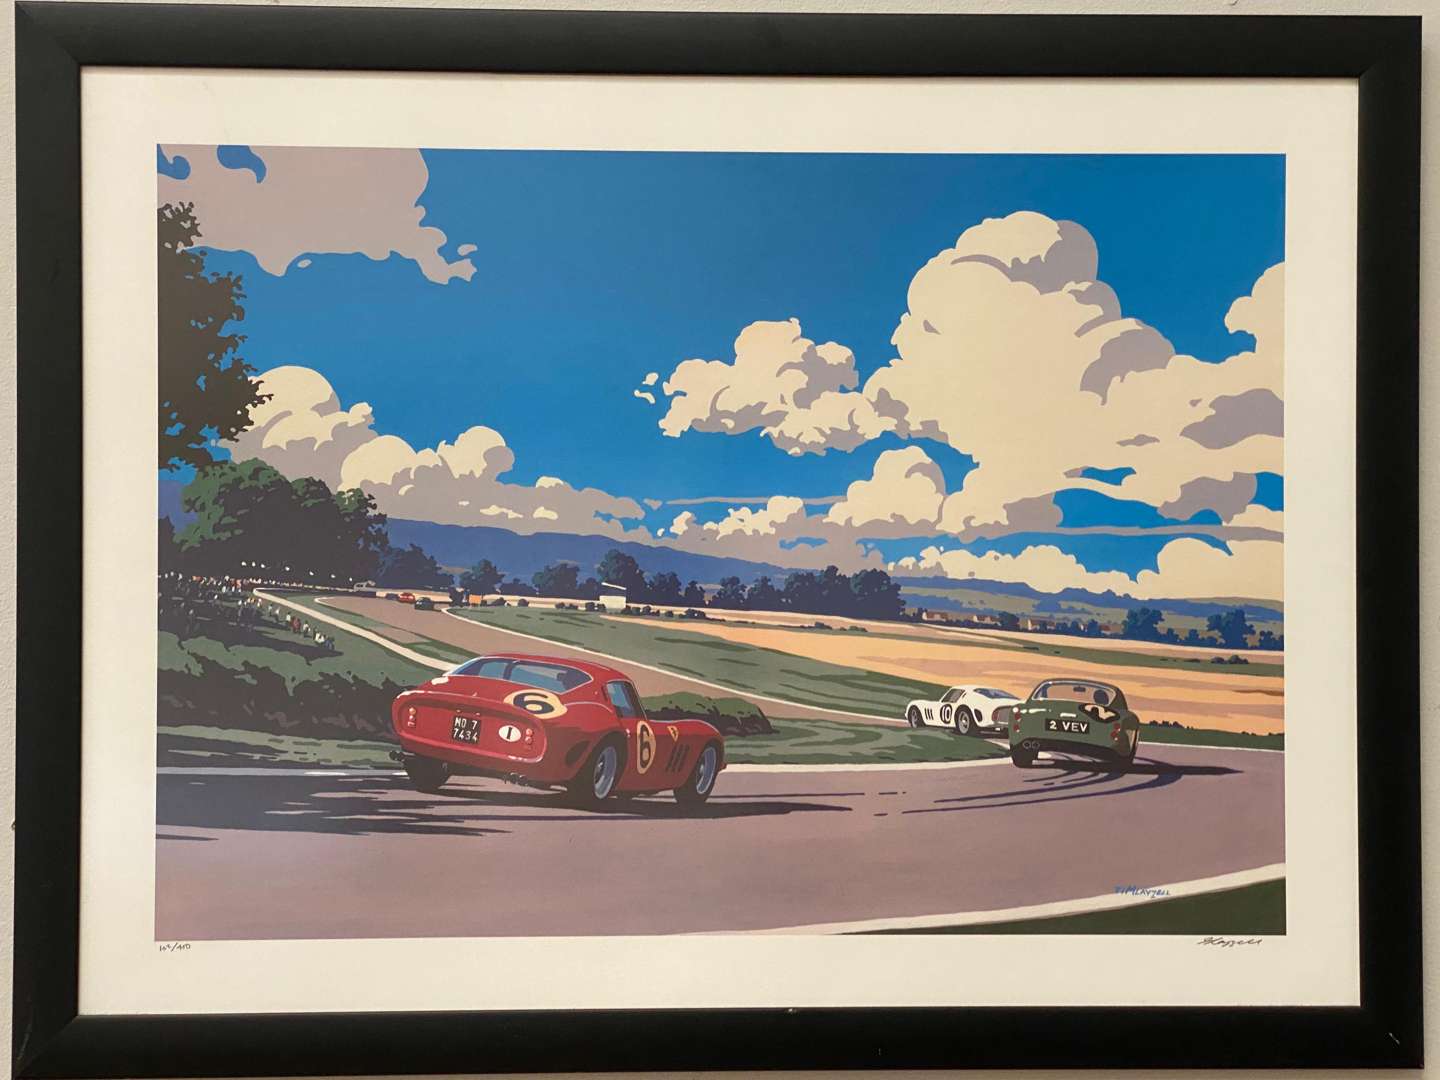 <p>TIM LAYZELL, “Summer at Goodwood”, signed, limited edition print</p>